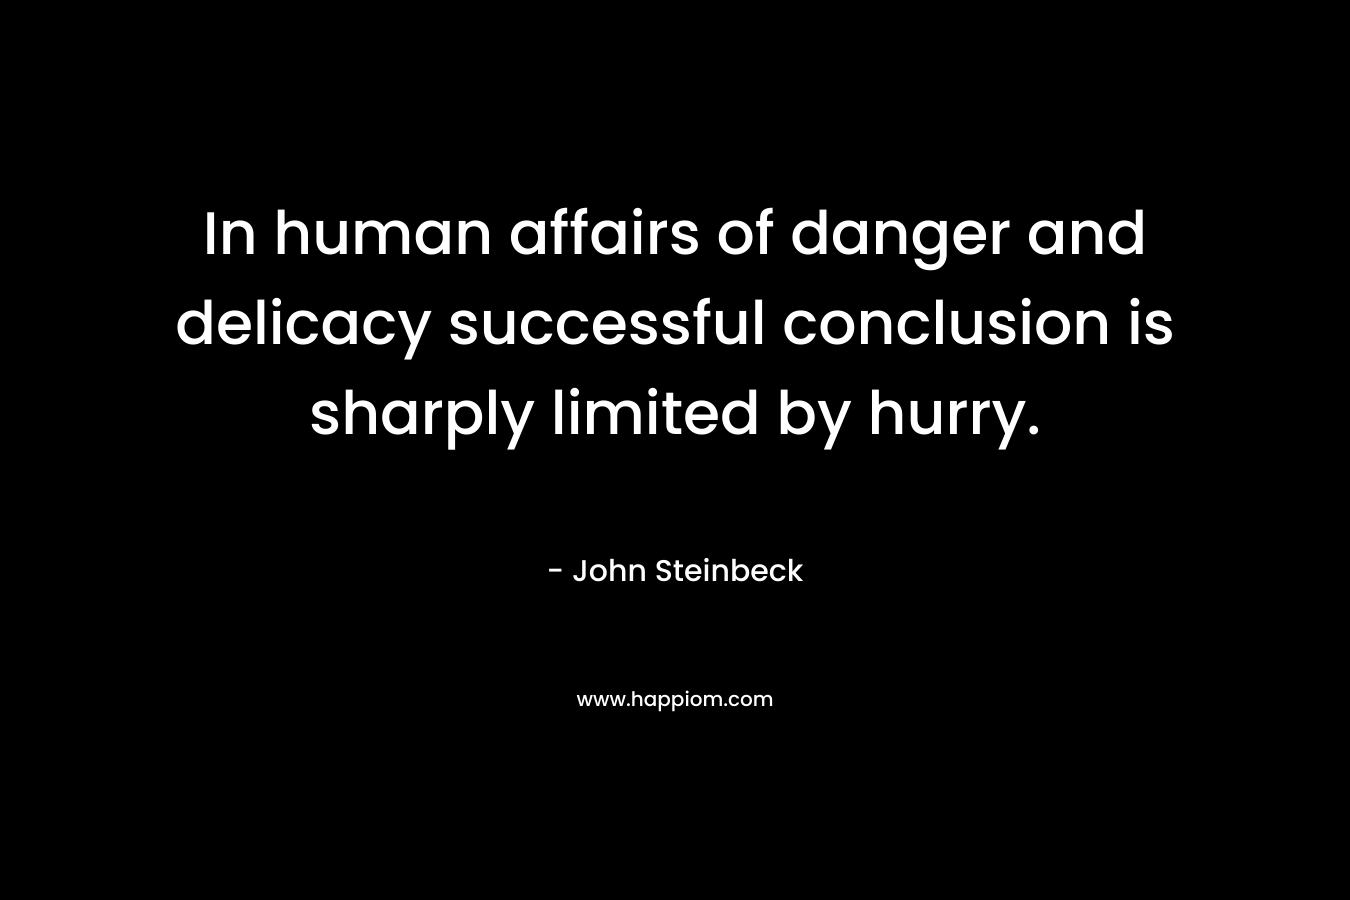 In human affairs of danger and delicacy successful conclusion is sharply limited by hurry.